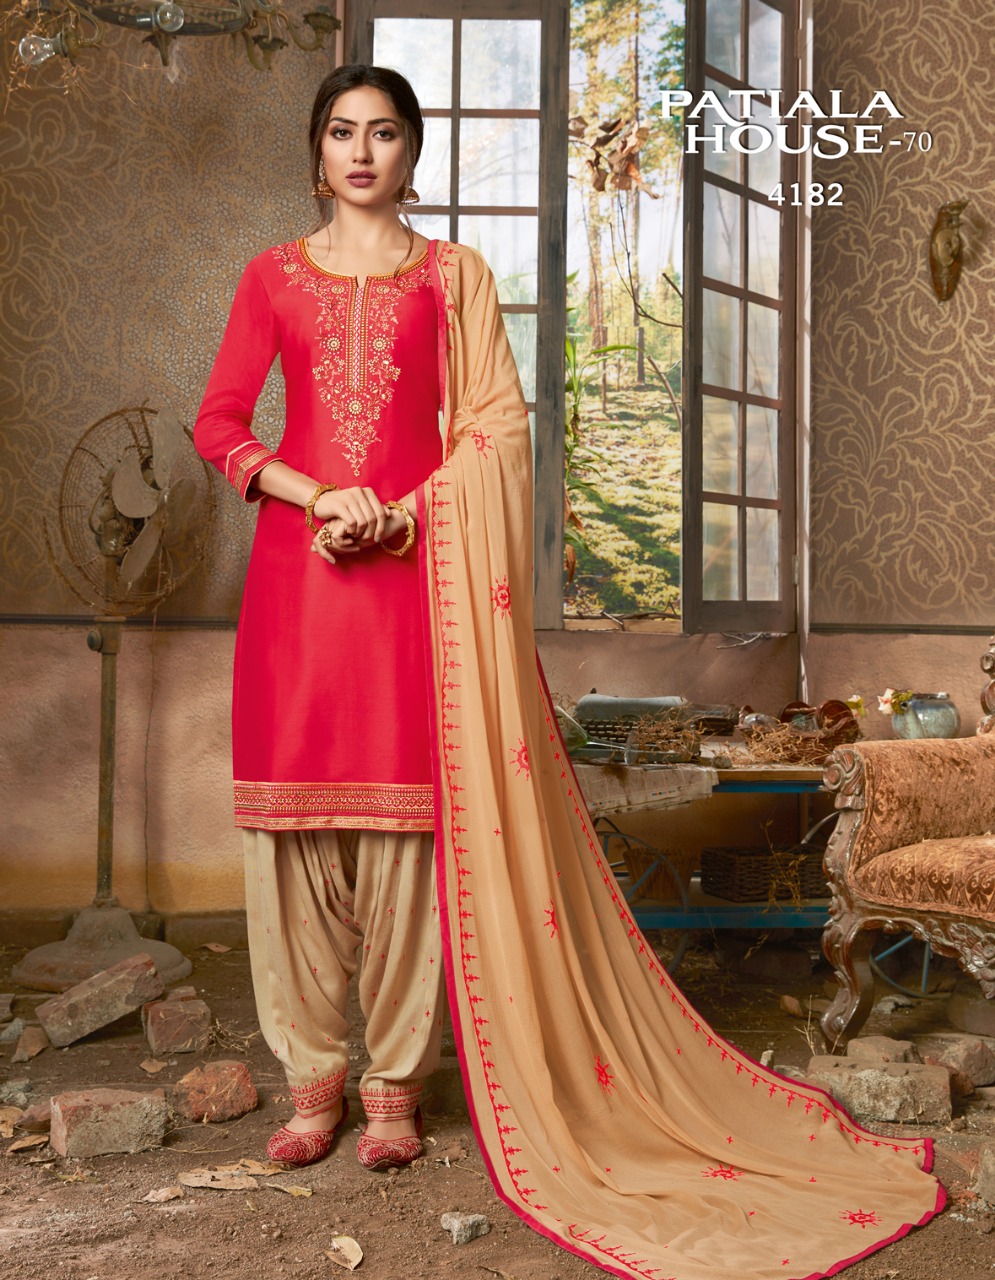 kessi fabrics patiala house vol 70 fancy collection of salwaar suits at reasonable rate